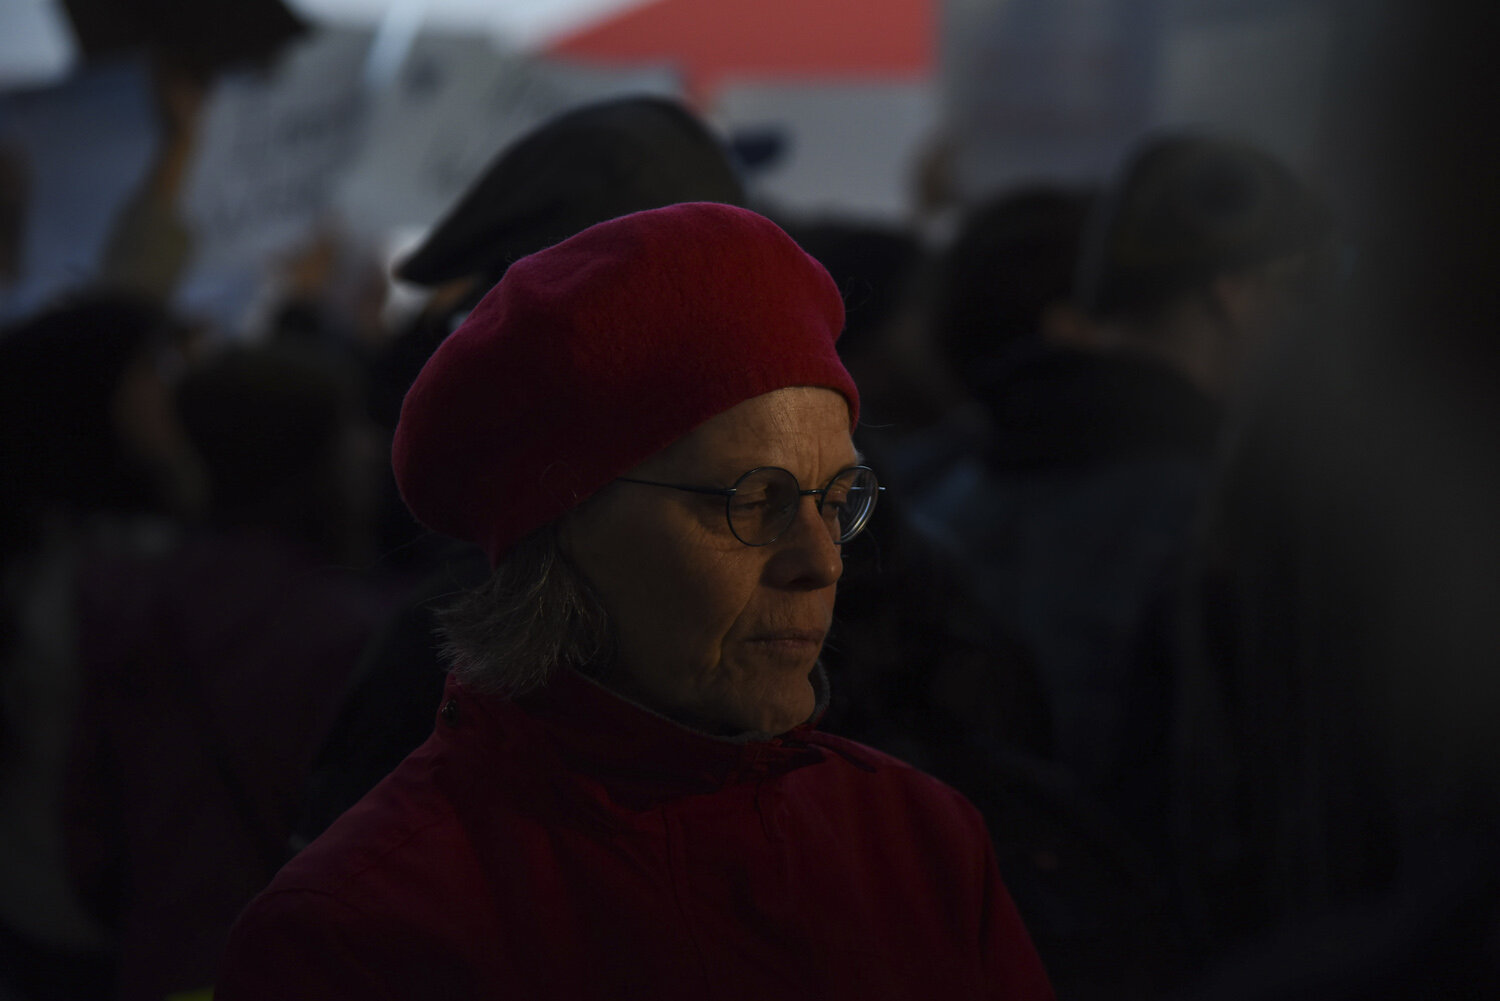  A woman appears lost in thought during a “No Ban, No Wall Protest” at the Hartsfield-Jackson Atlanta International Airport. Protesters gathered to demonstrate against President Trump’s quick policy changes regarding immigration and travel to the US 